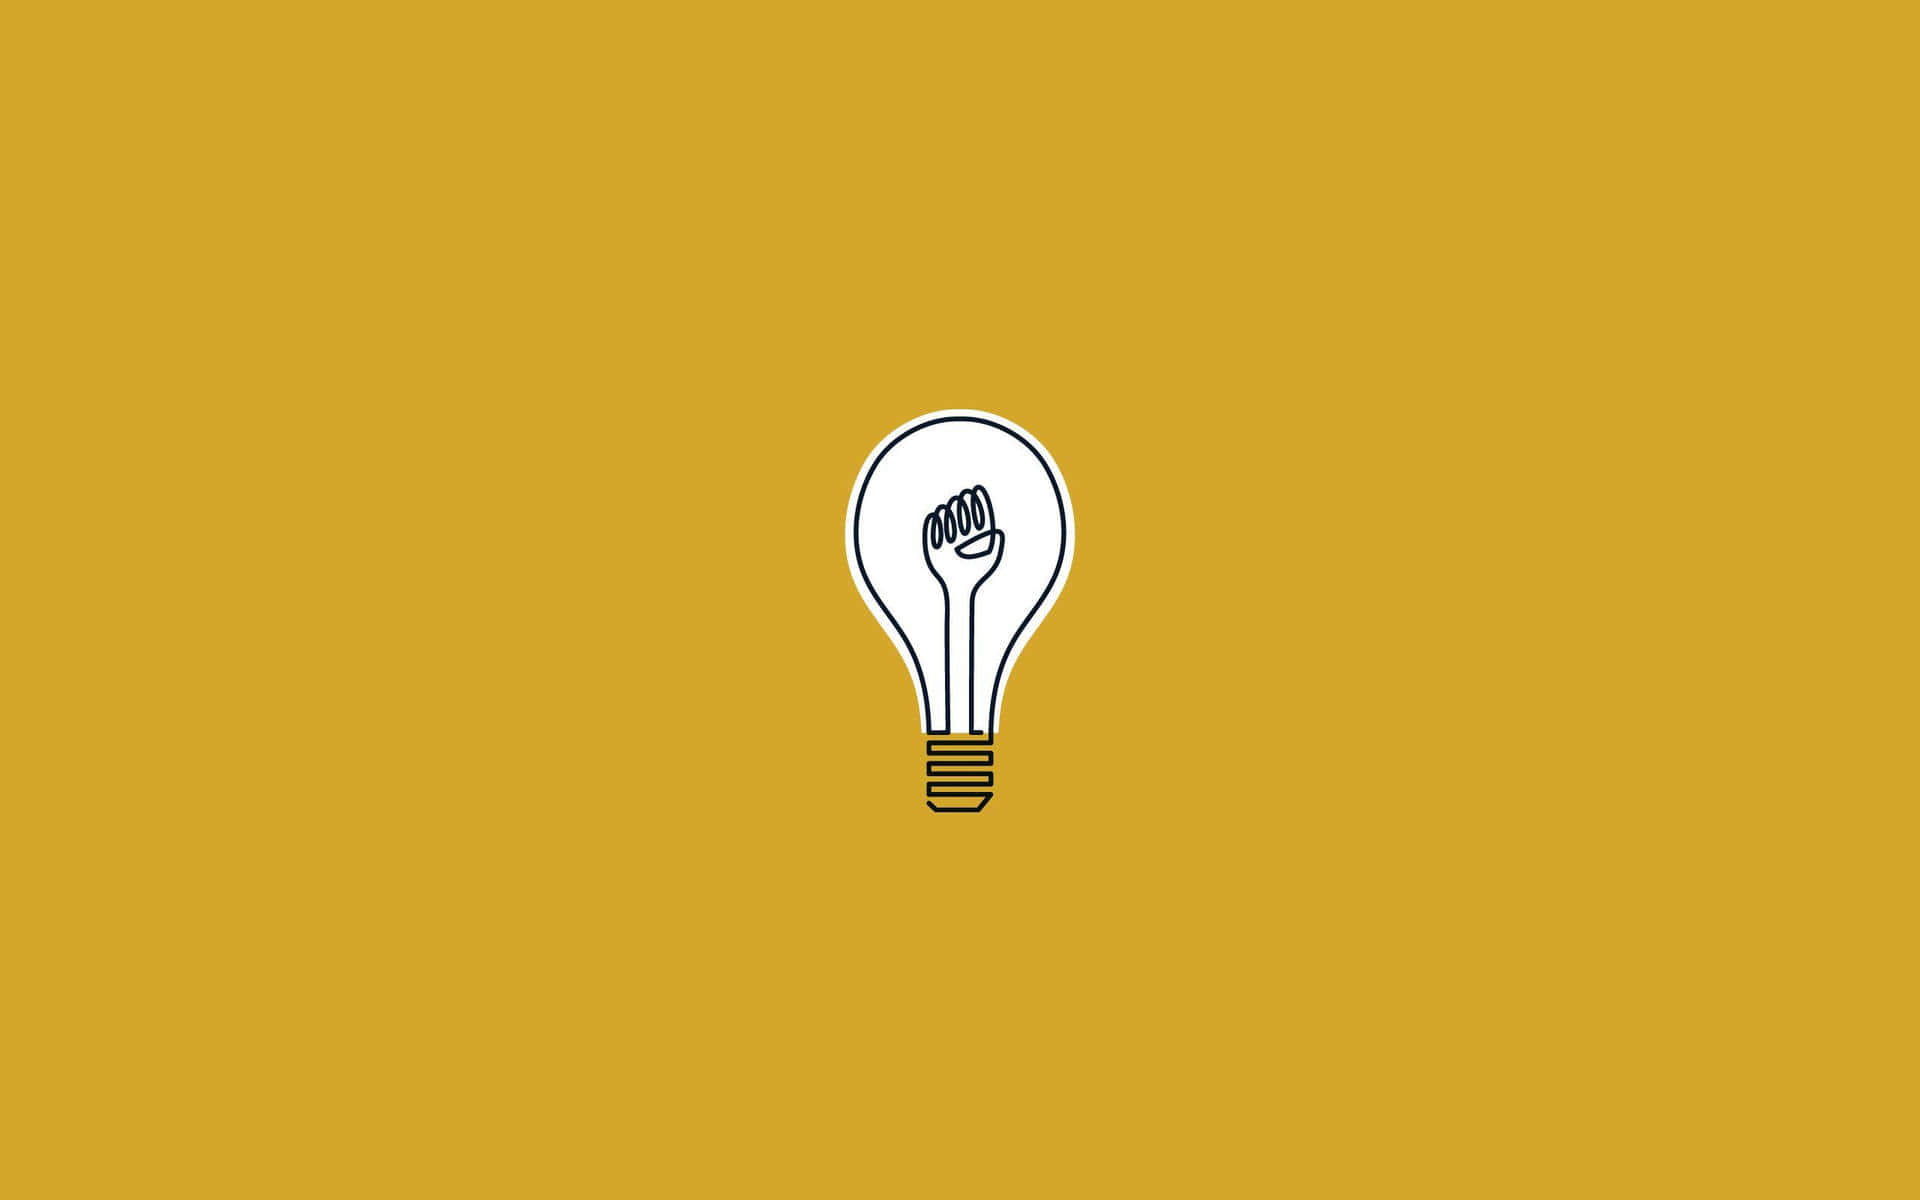 A Light Bulb On A Yellow Background